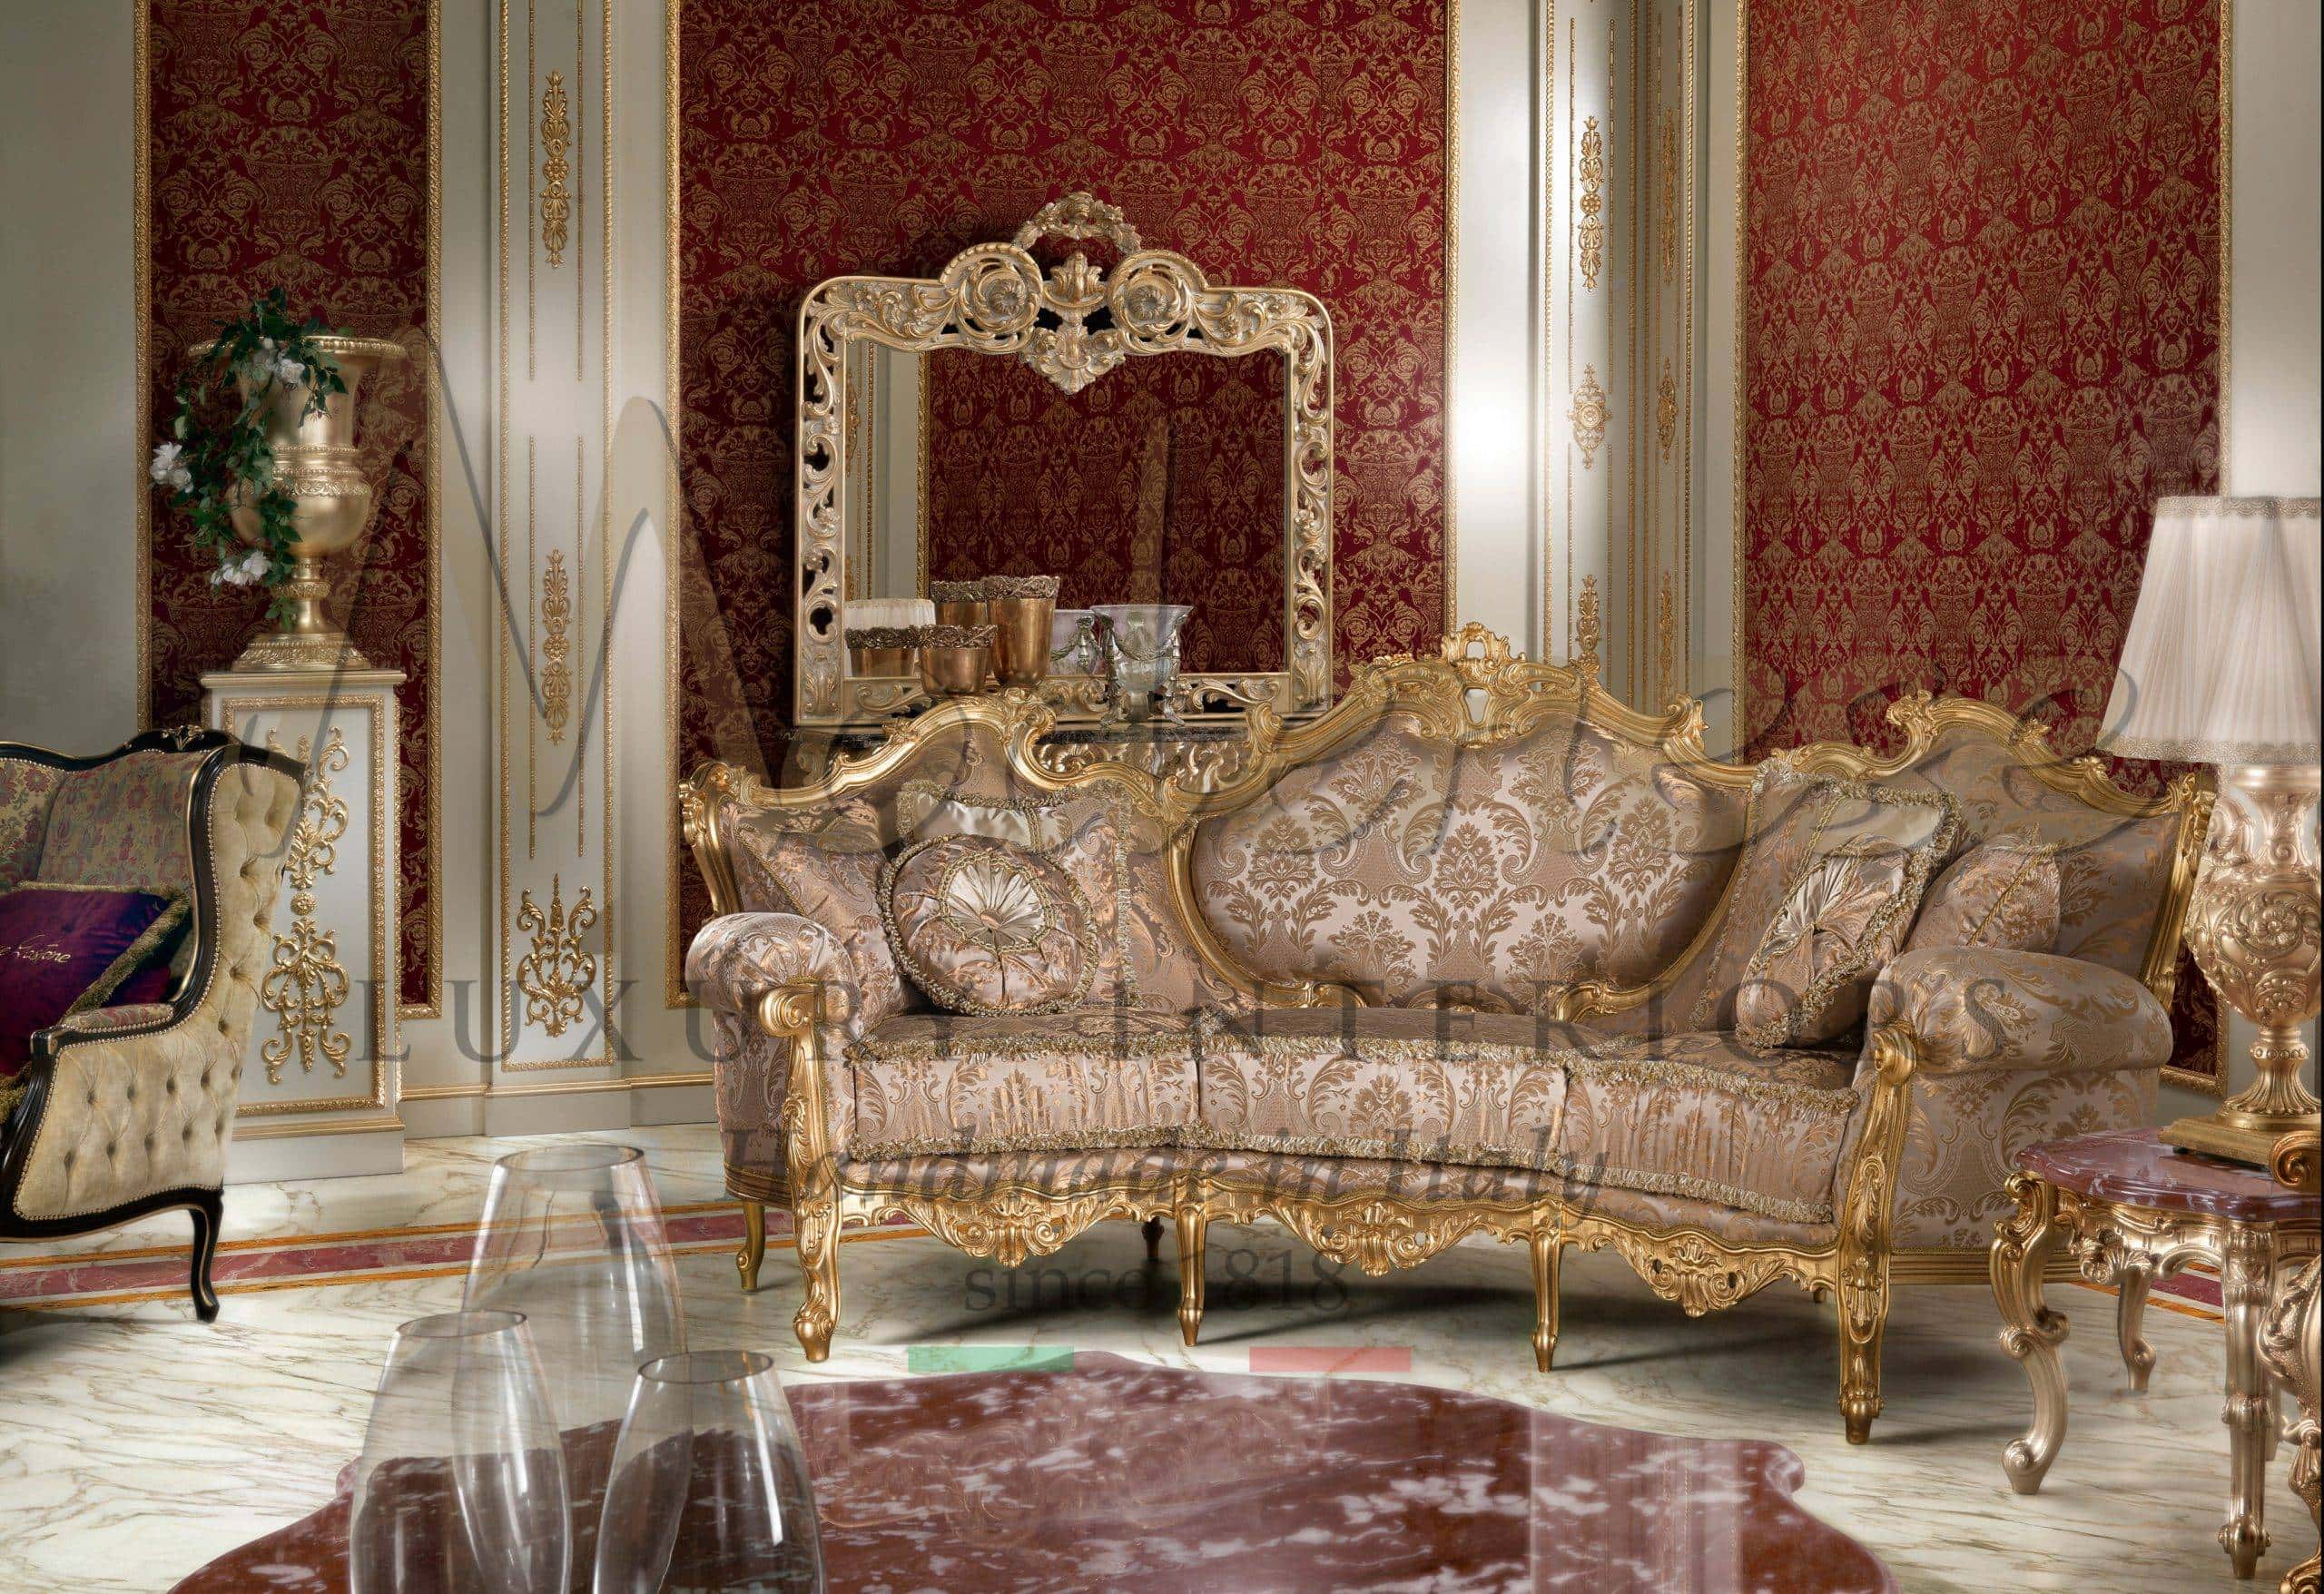 baroque classic luxury furniture selection interior design service consultance opulent golden leaf carved solid wood residential palace project villa decoration home decoration interior service customized furniture handcrafted